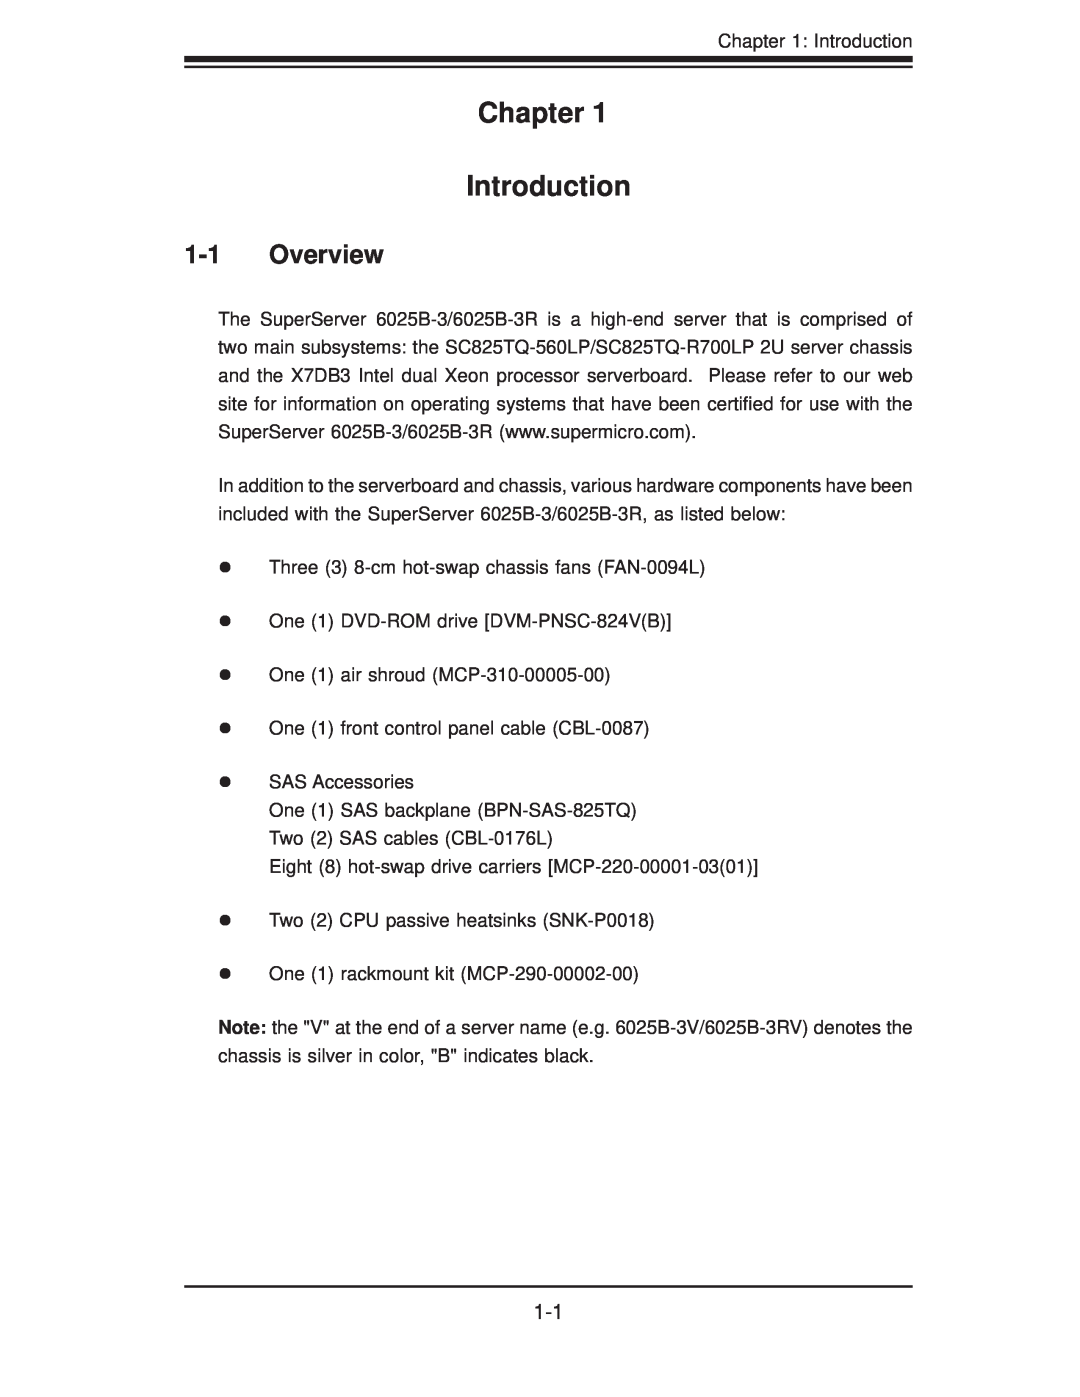 SUPER MICRO Computer 6025B-3R user manual Chapter Introduction, Overview 